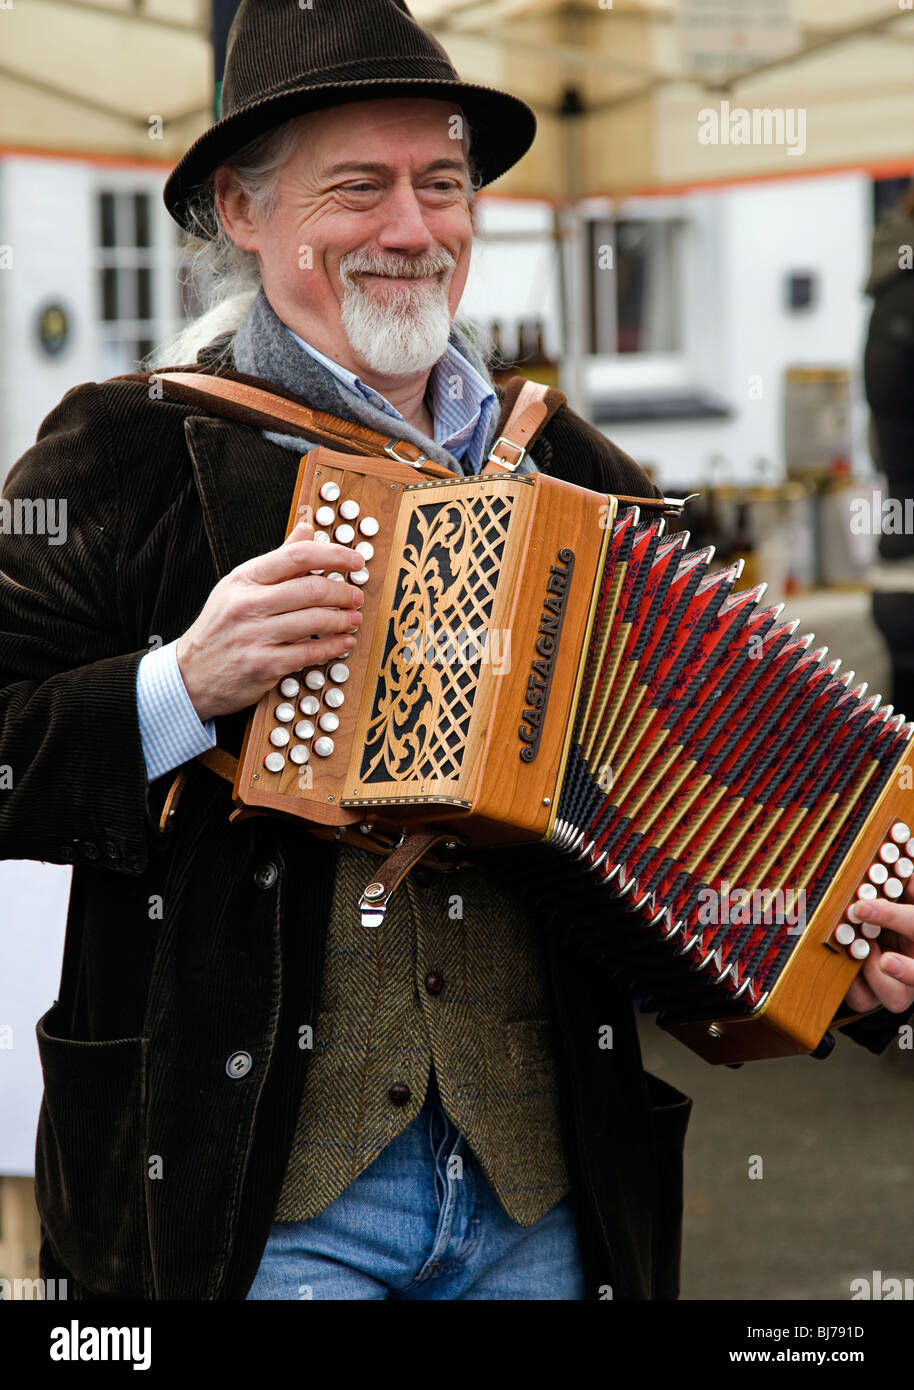 KINETON, WARKS; March 13:  Traditional folk musician plays the accordian at a farmer's market at Kineton, Wark, 13 March 2010 Stock Photo